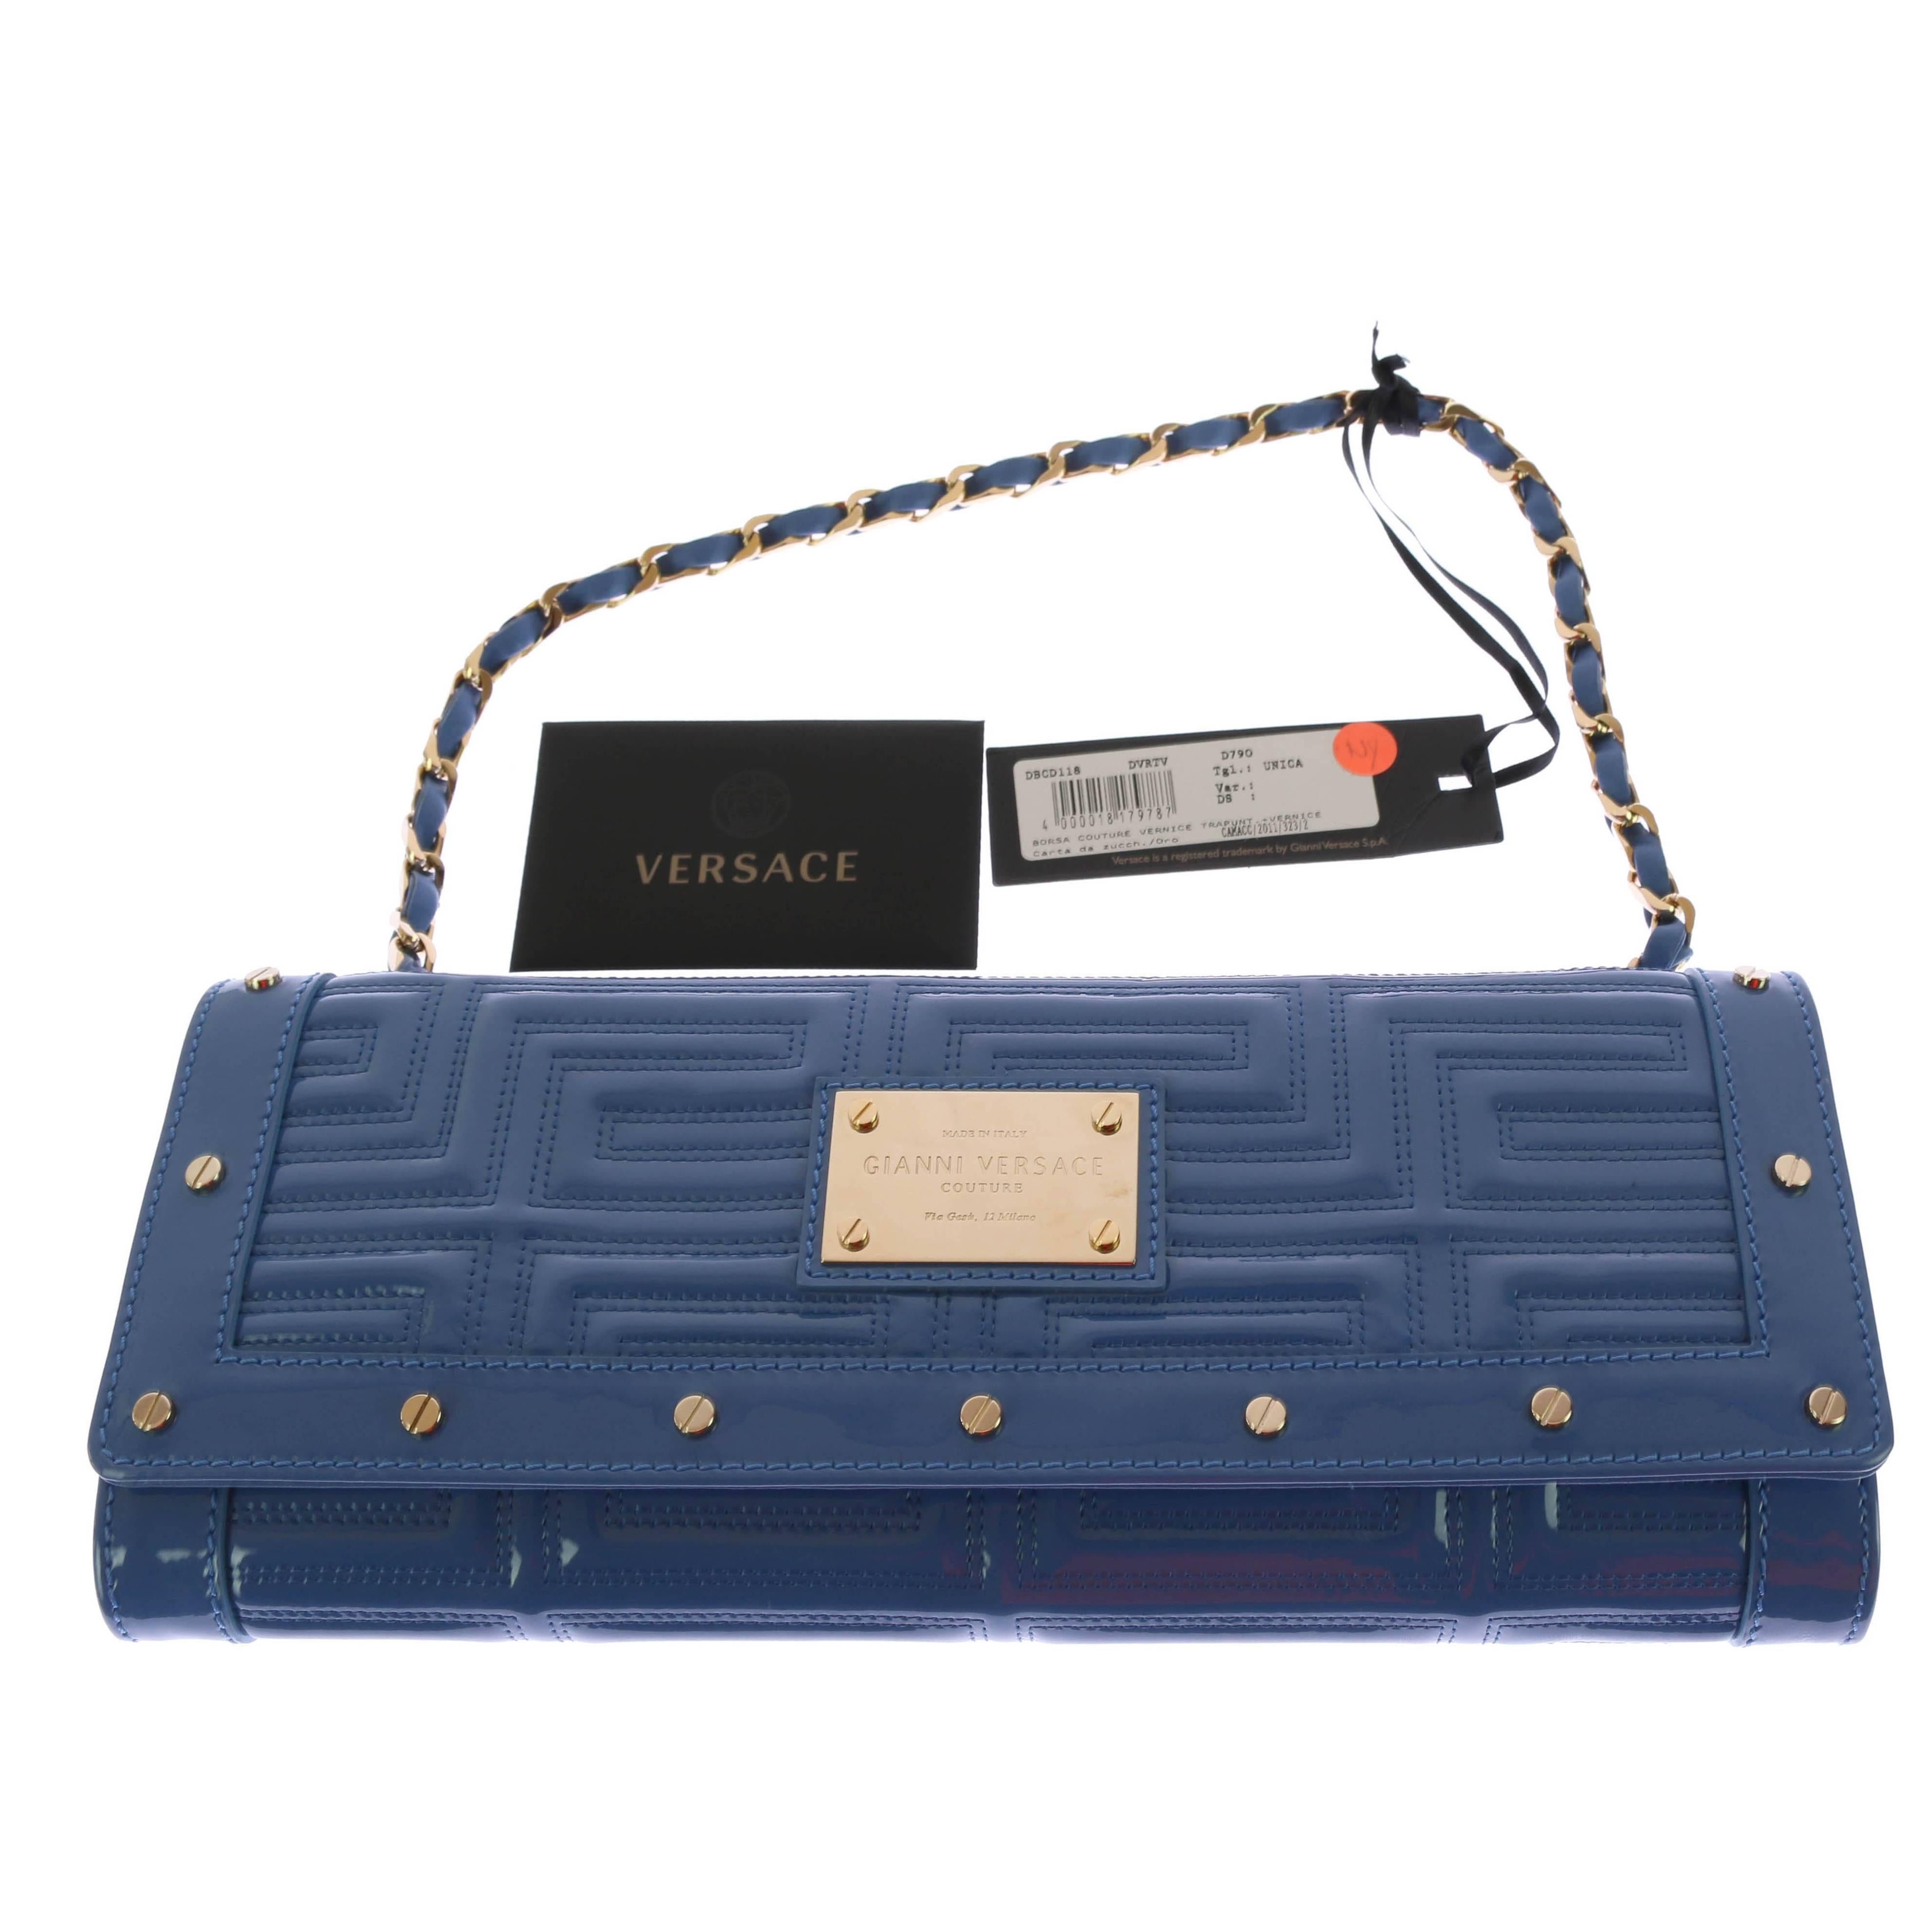 Gianni Versace Couture blue patent leather bag clutch with chain